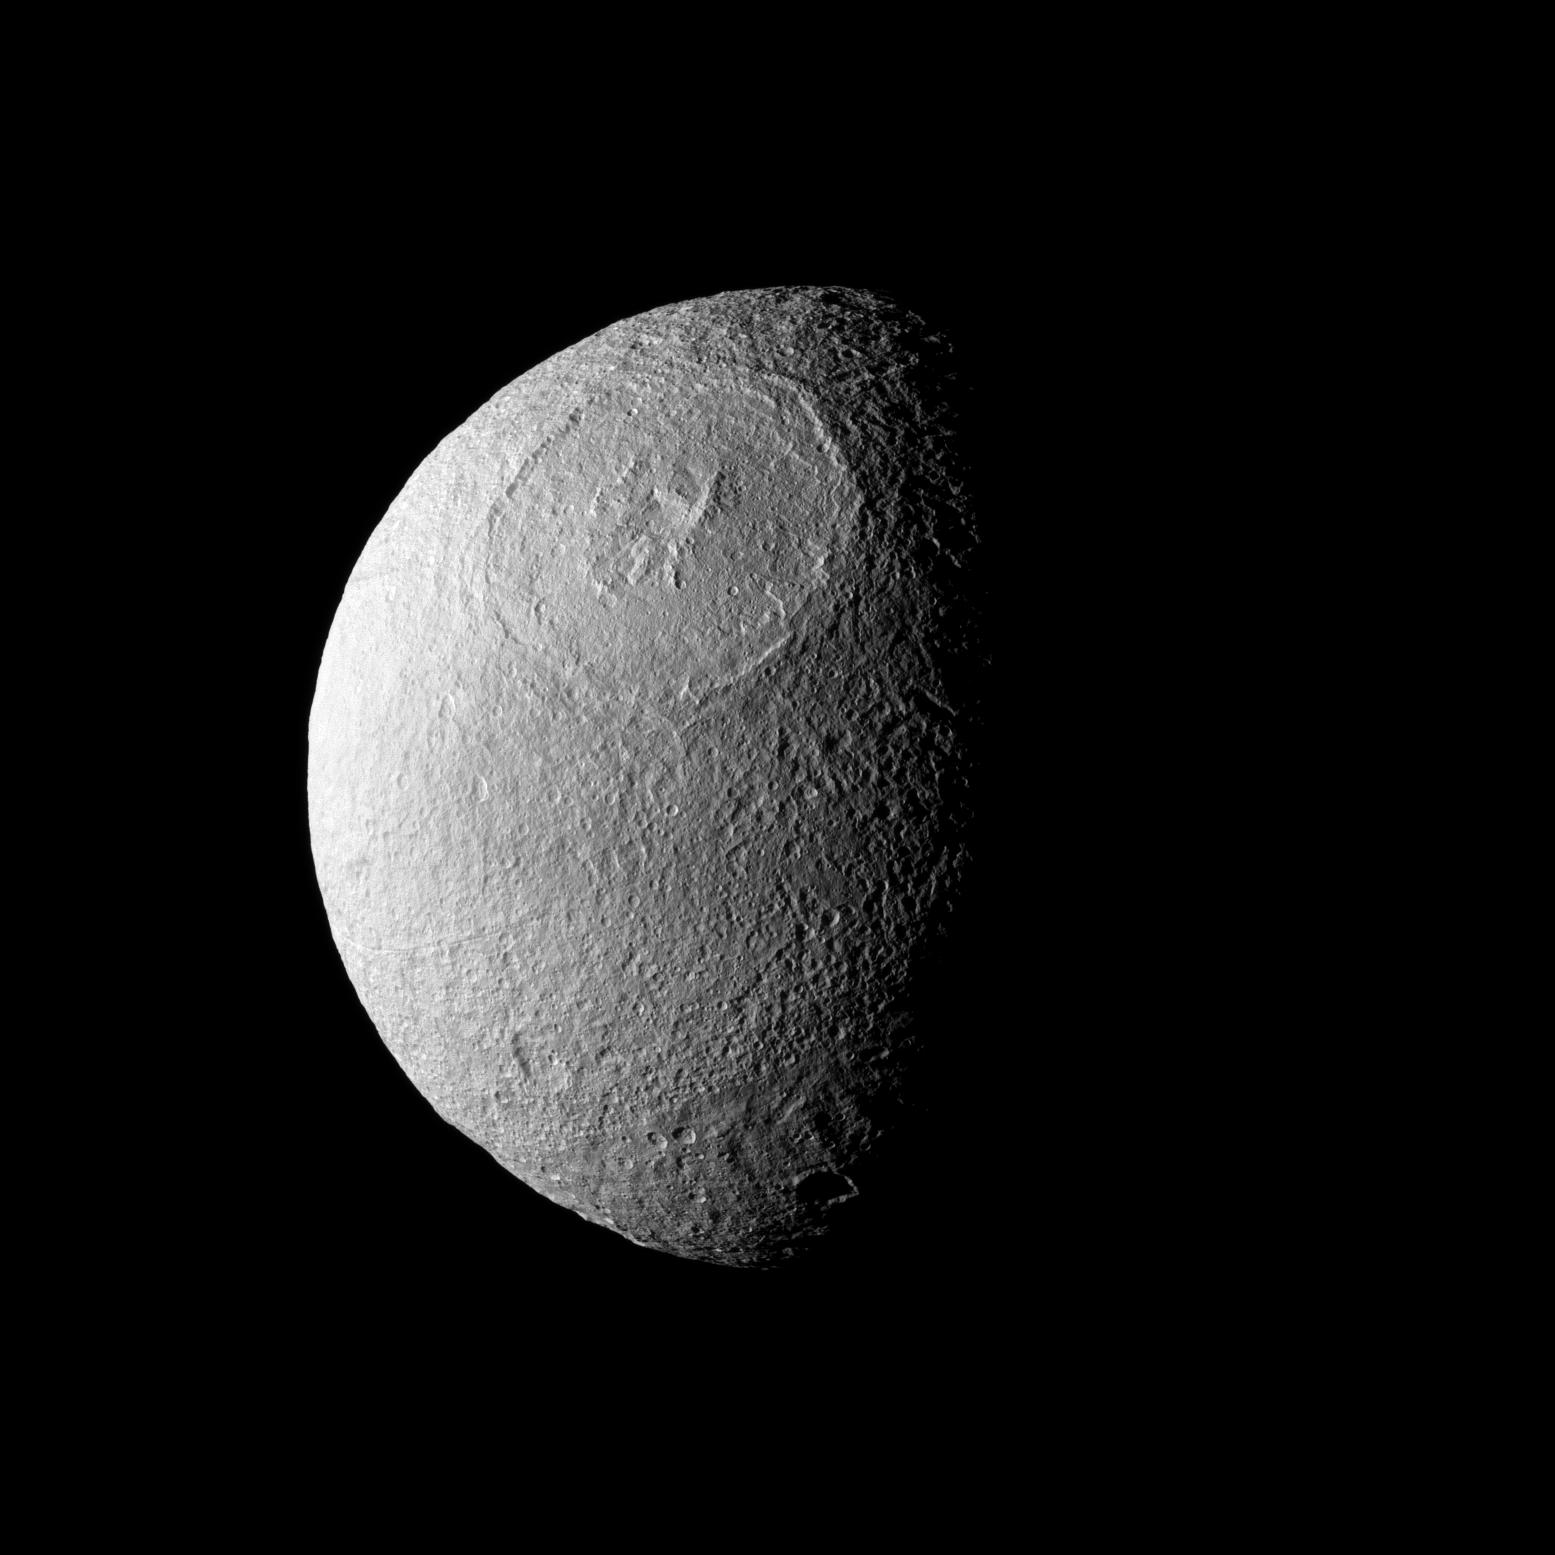 Odysseus Crater stretches across a large northern expanse on Tethys.